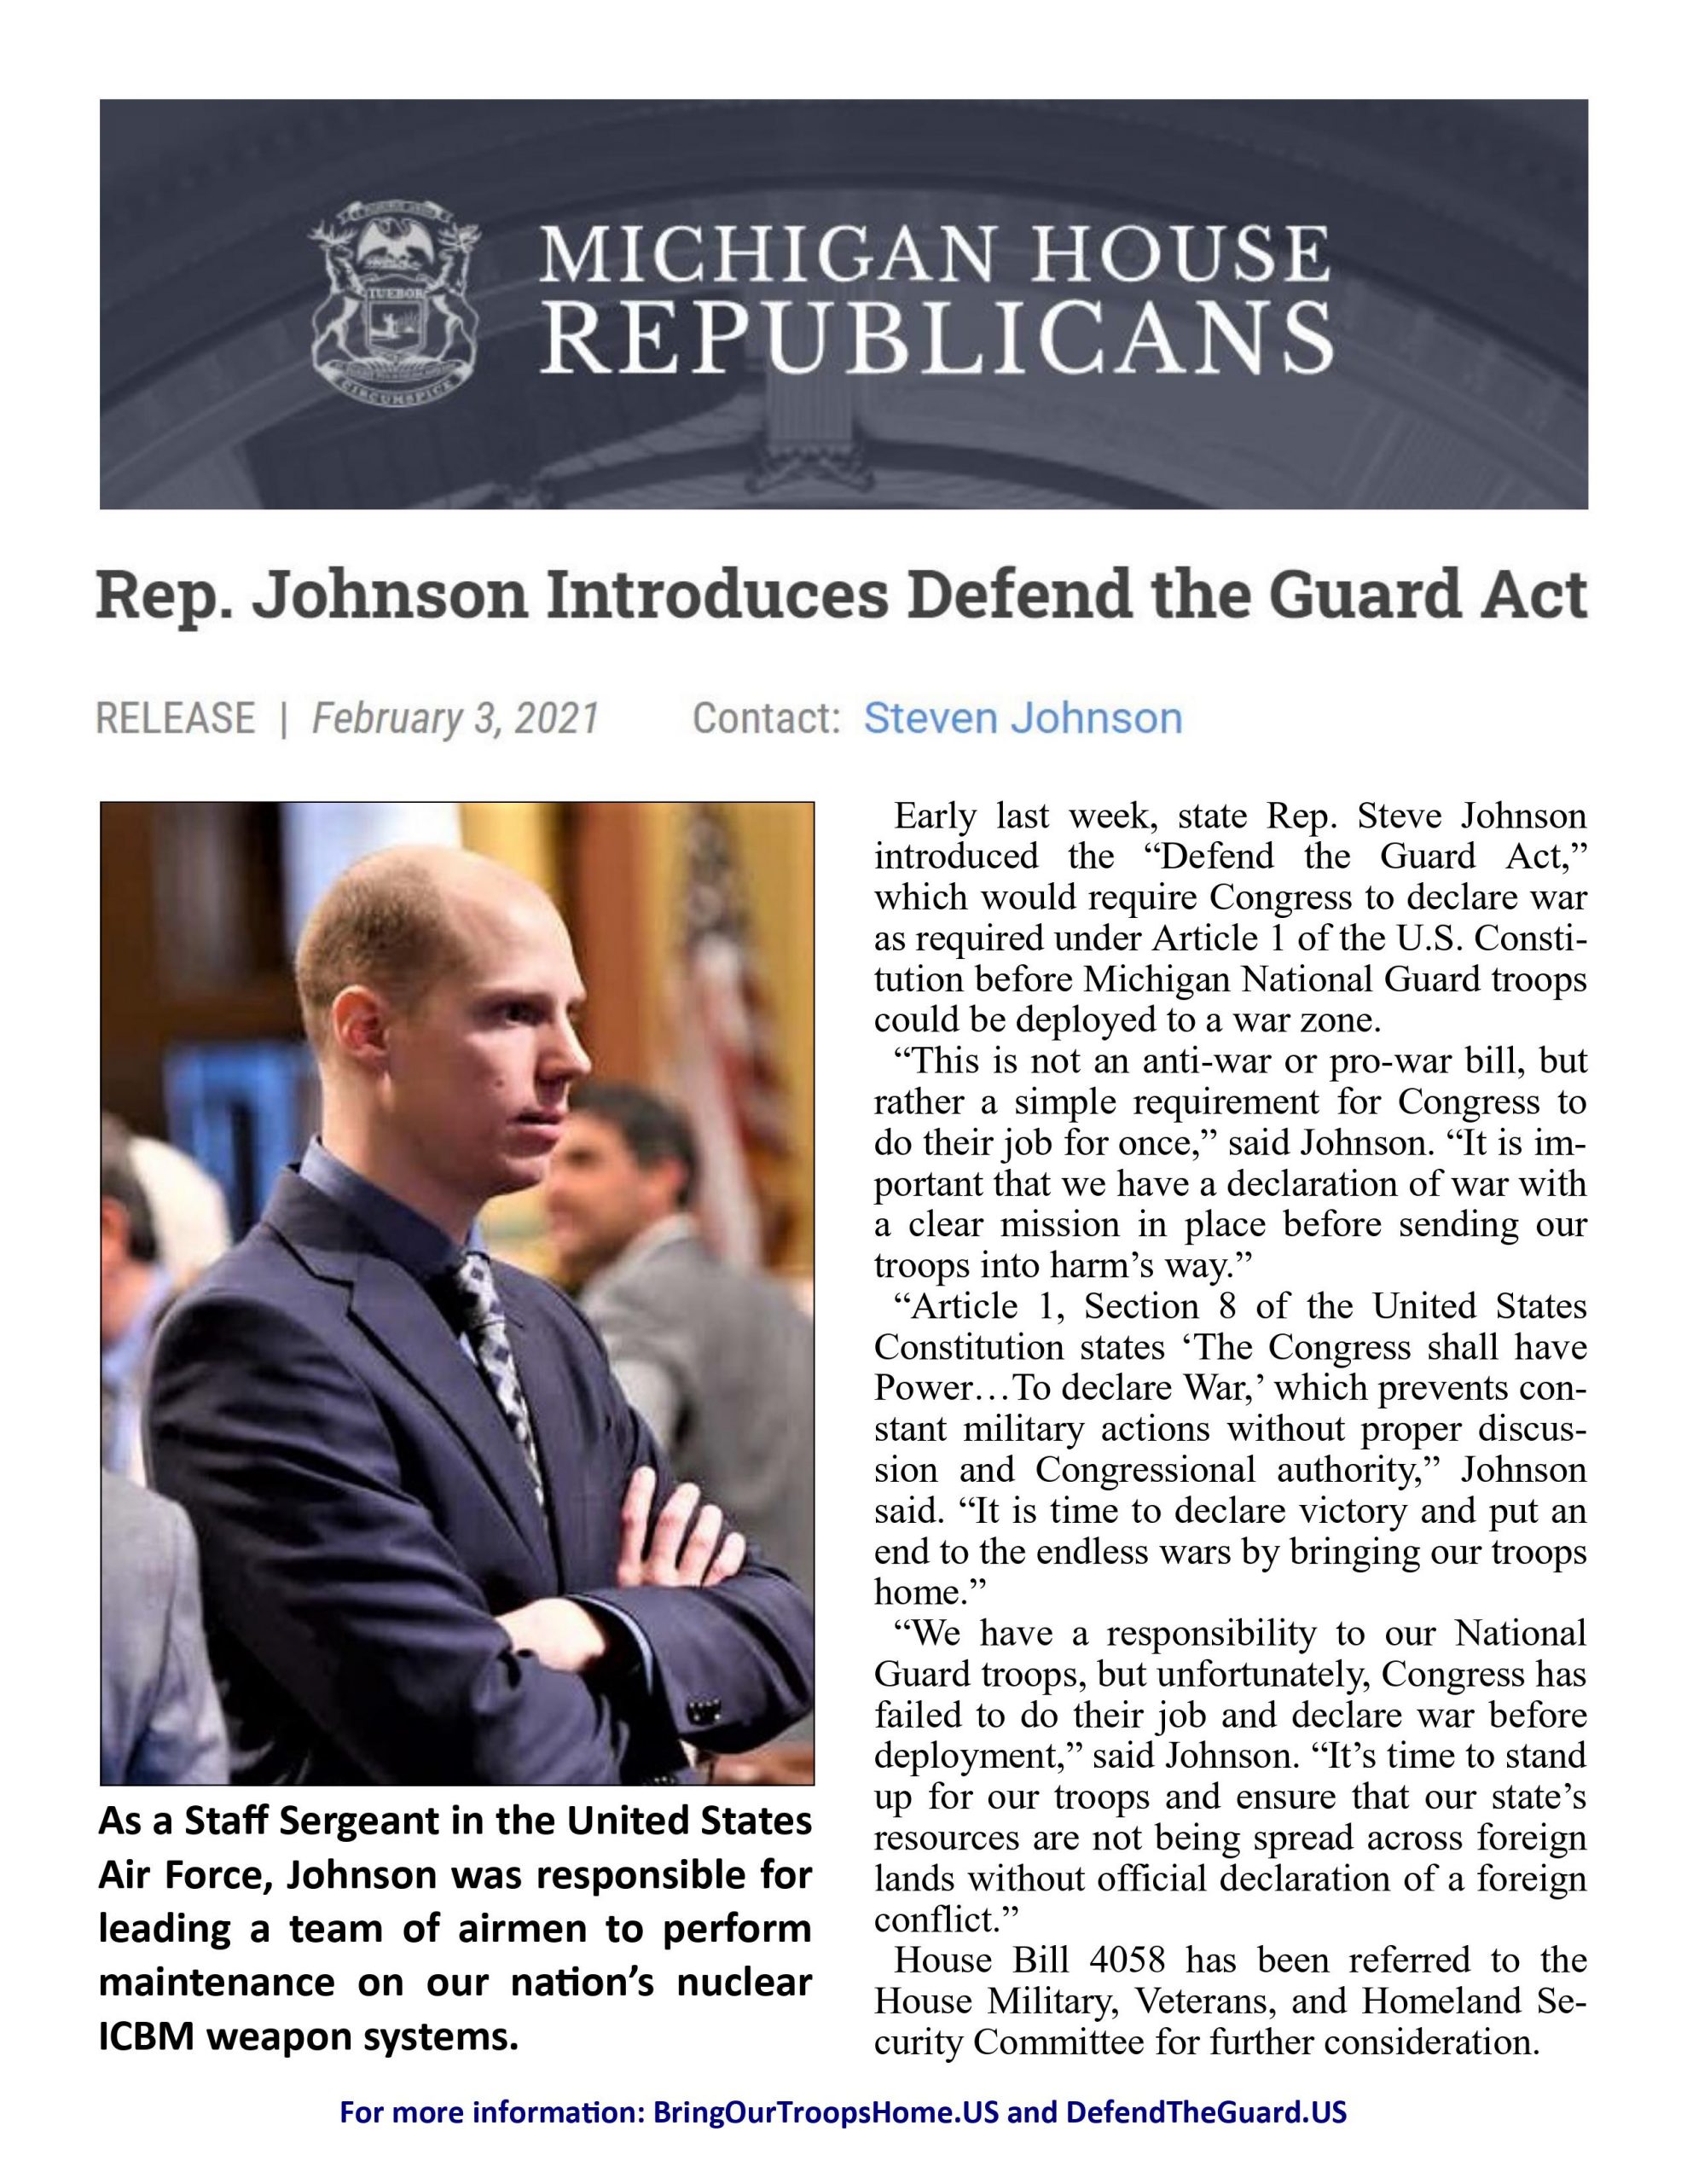 Rep. Johnson Introduces Defend the Guard Act